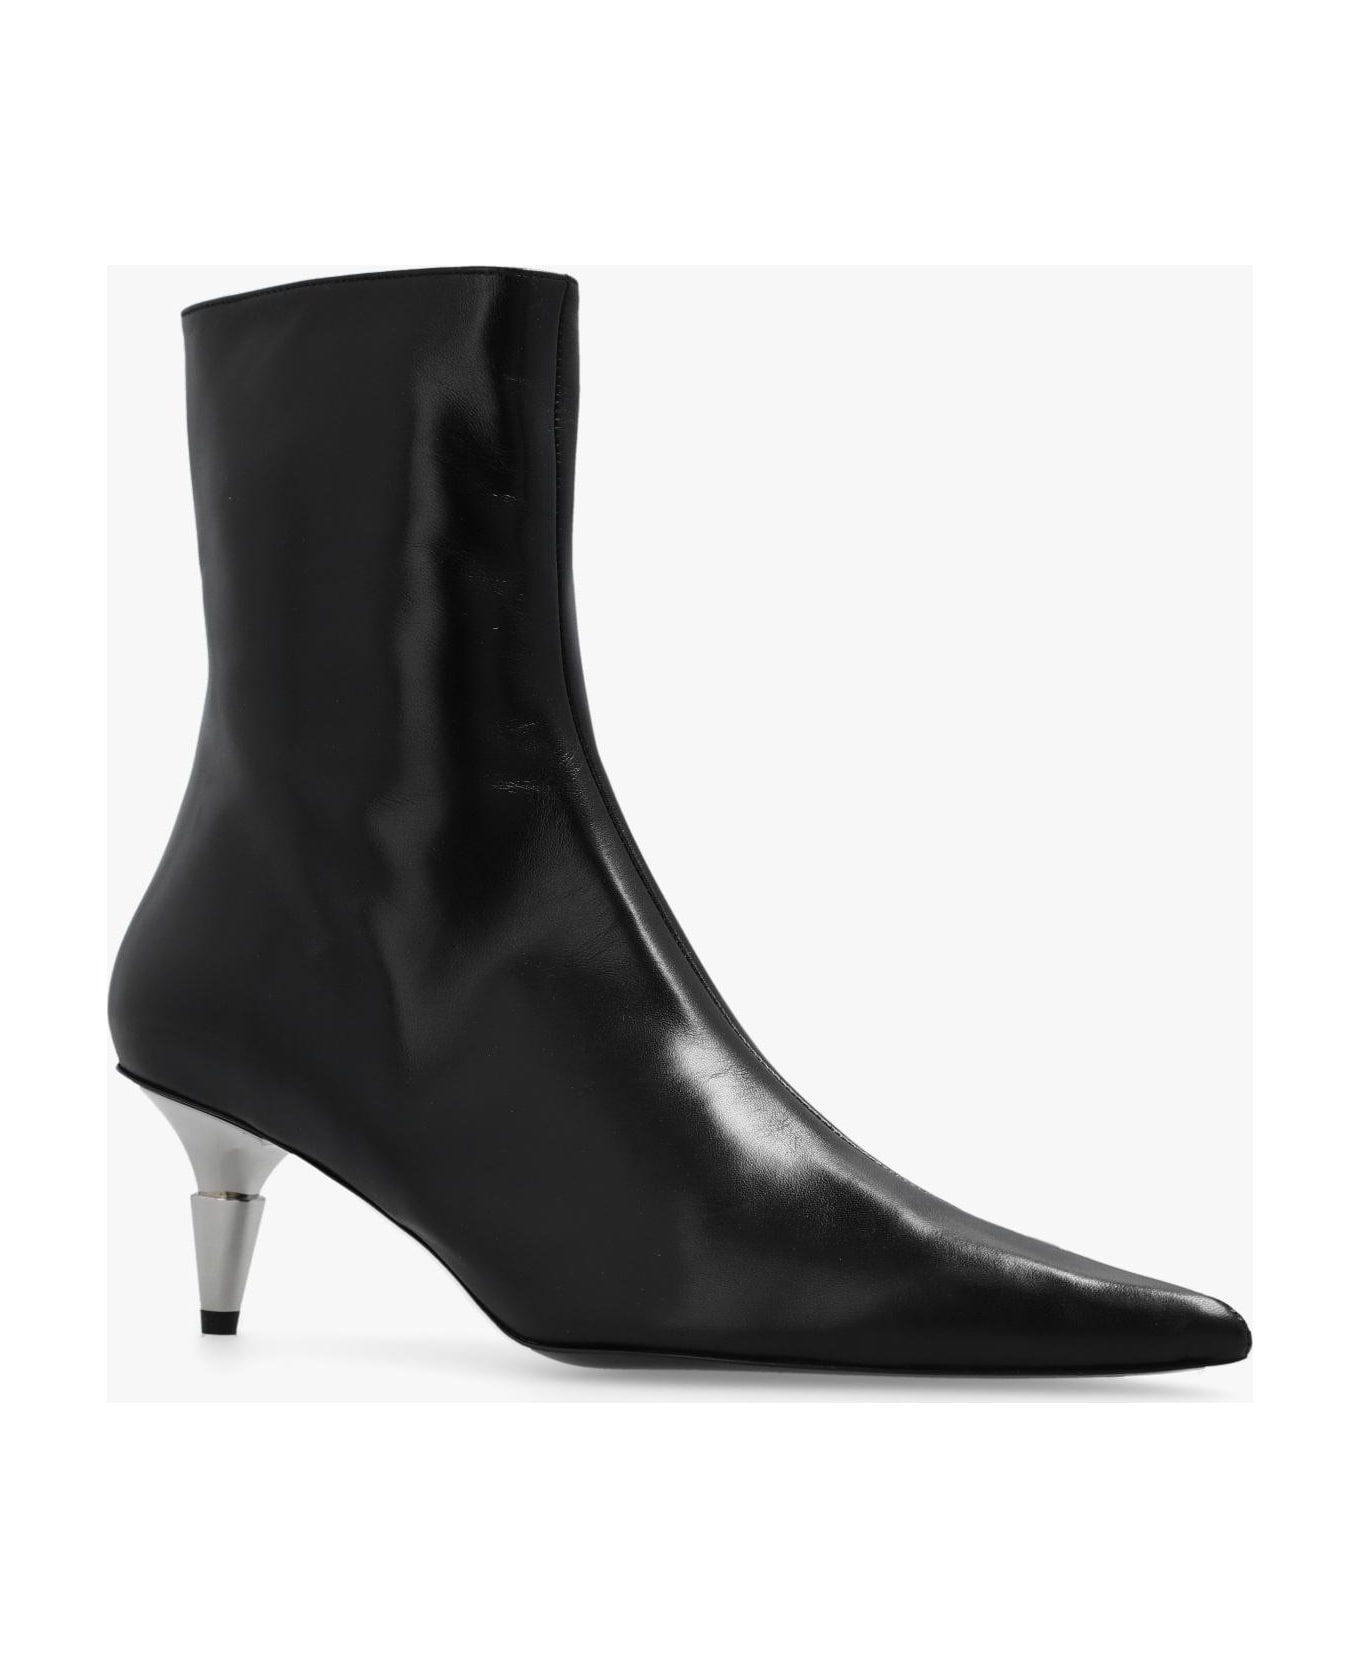 Proenza Schouler 'spike' Heeled Ankle Boots In Leather - Black